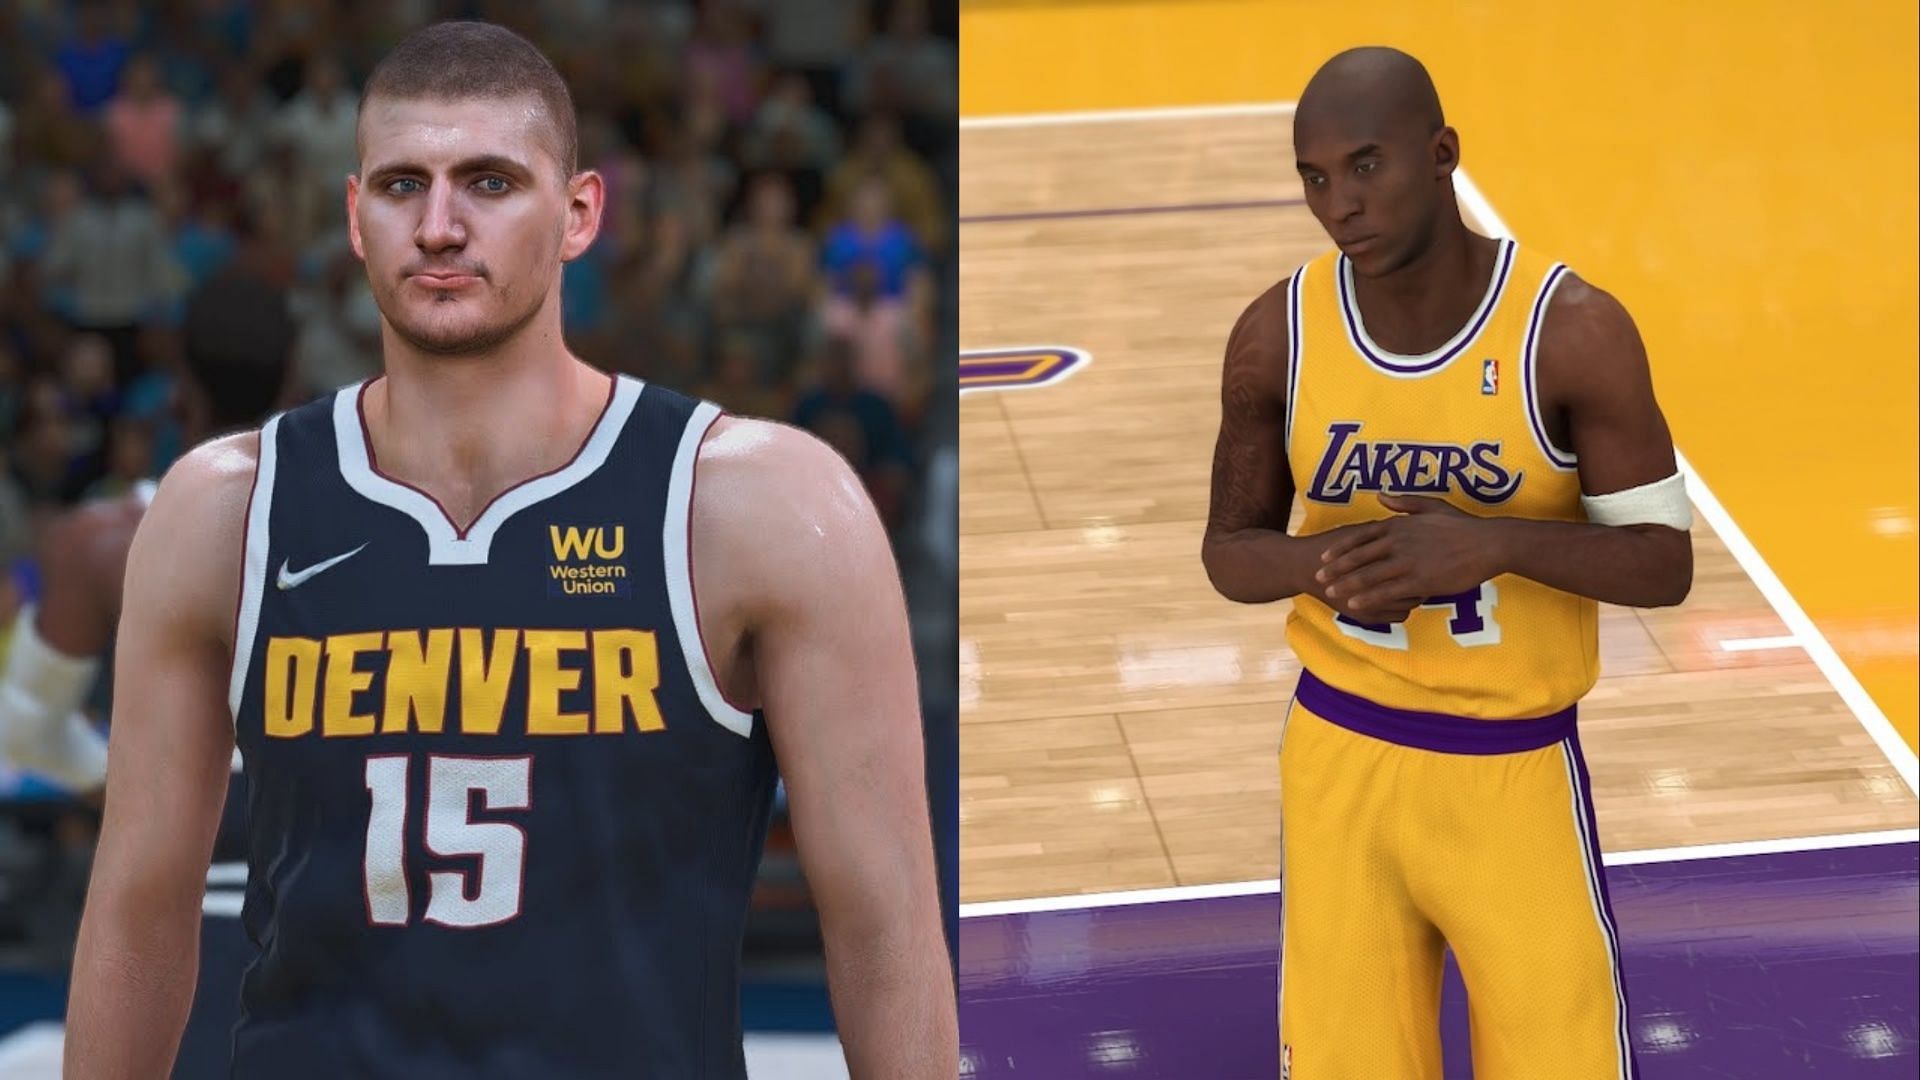 Do you think that Michael and Lebron would be the front cover of NBA 2k23 :  r/NBA2k